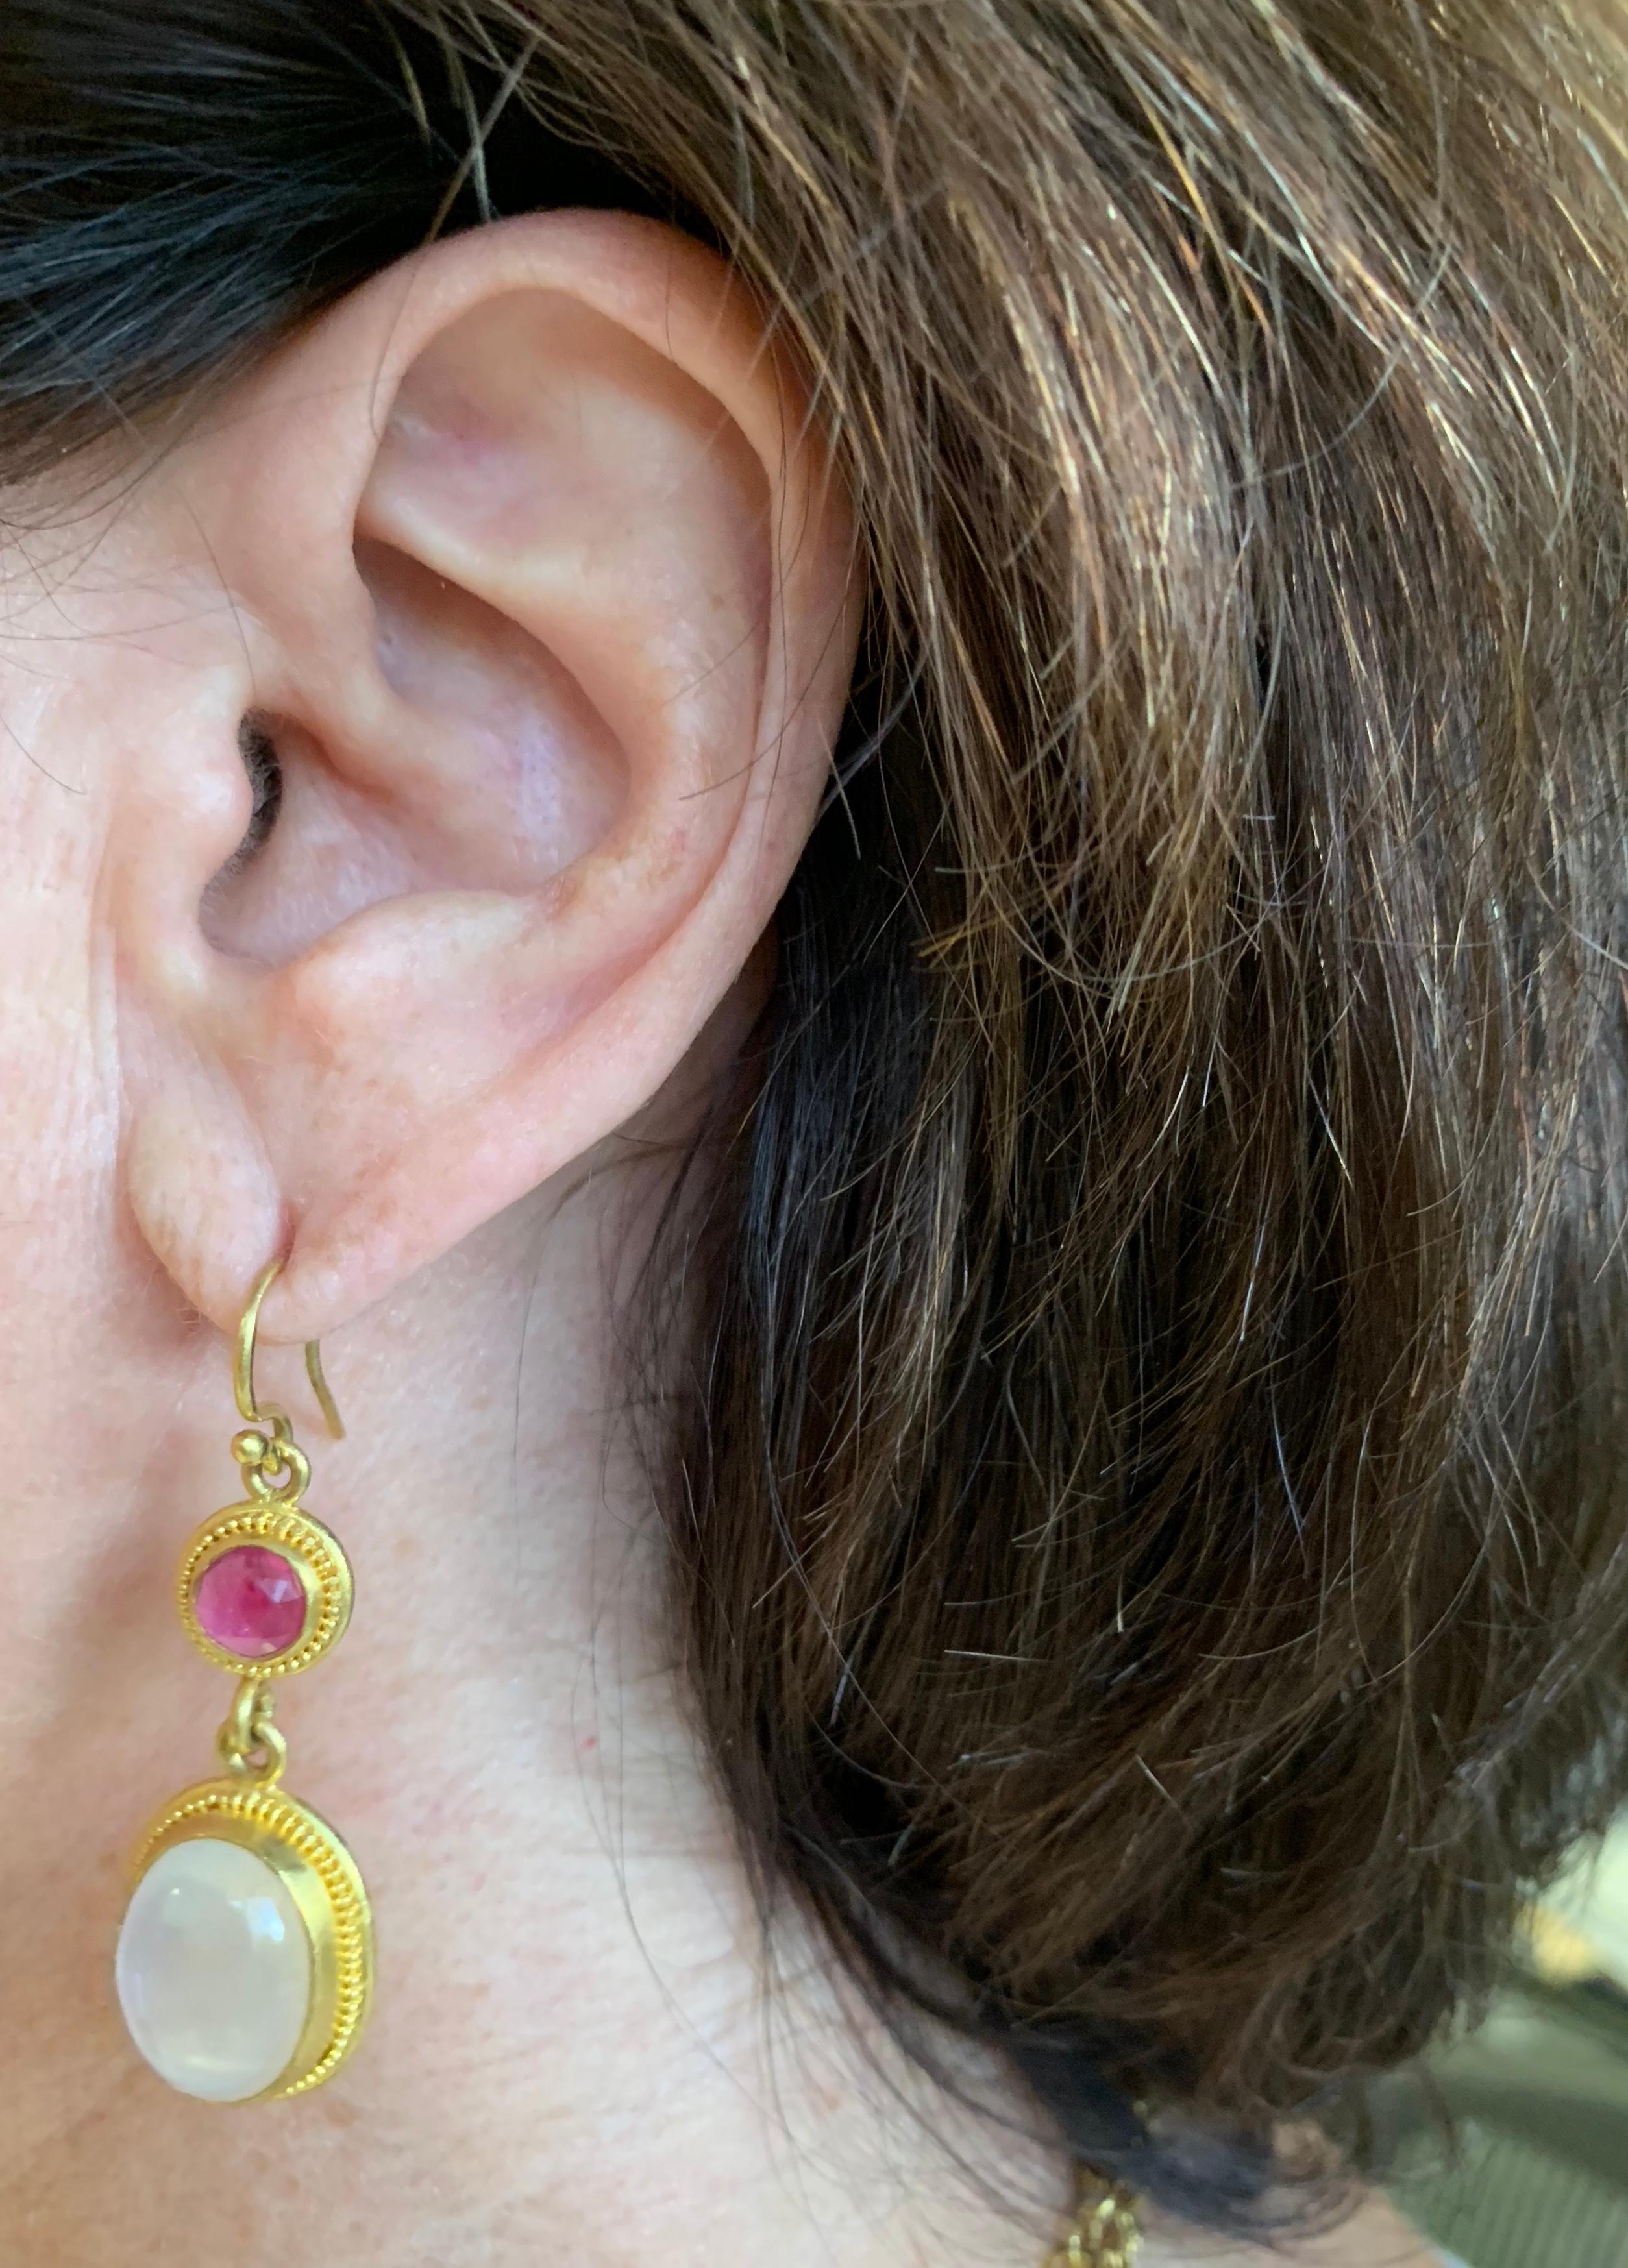 Rose cut Madagscar Rubies 6.5 millimeters  2.80 carats and Sri Lanka Moonstones 15.5 x 11.5 millimeters weighing 17 carats,  set in antique Roman fashion in 22 karat gold with granulation.
Earwire are 20 karat gold.
The earrings are hand crafted in